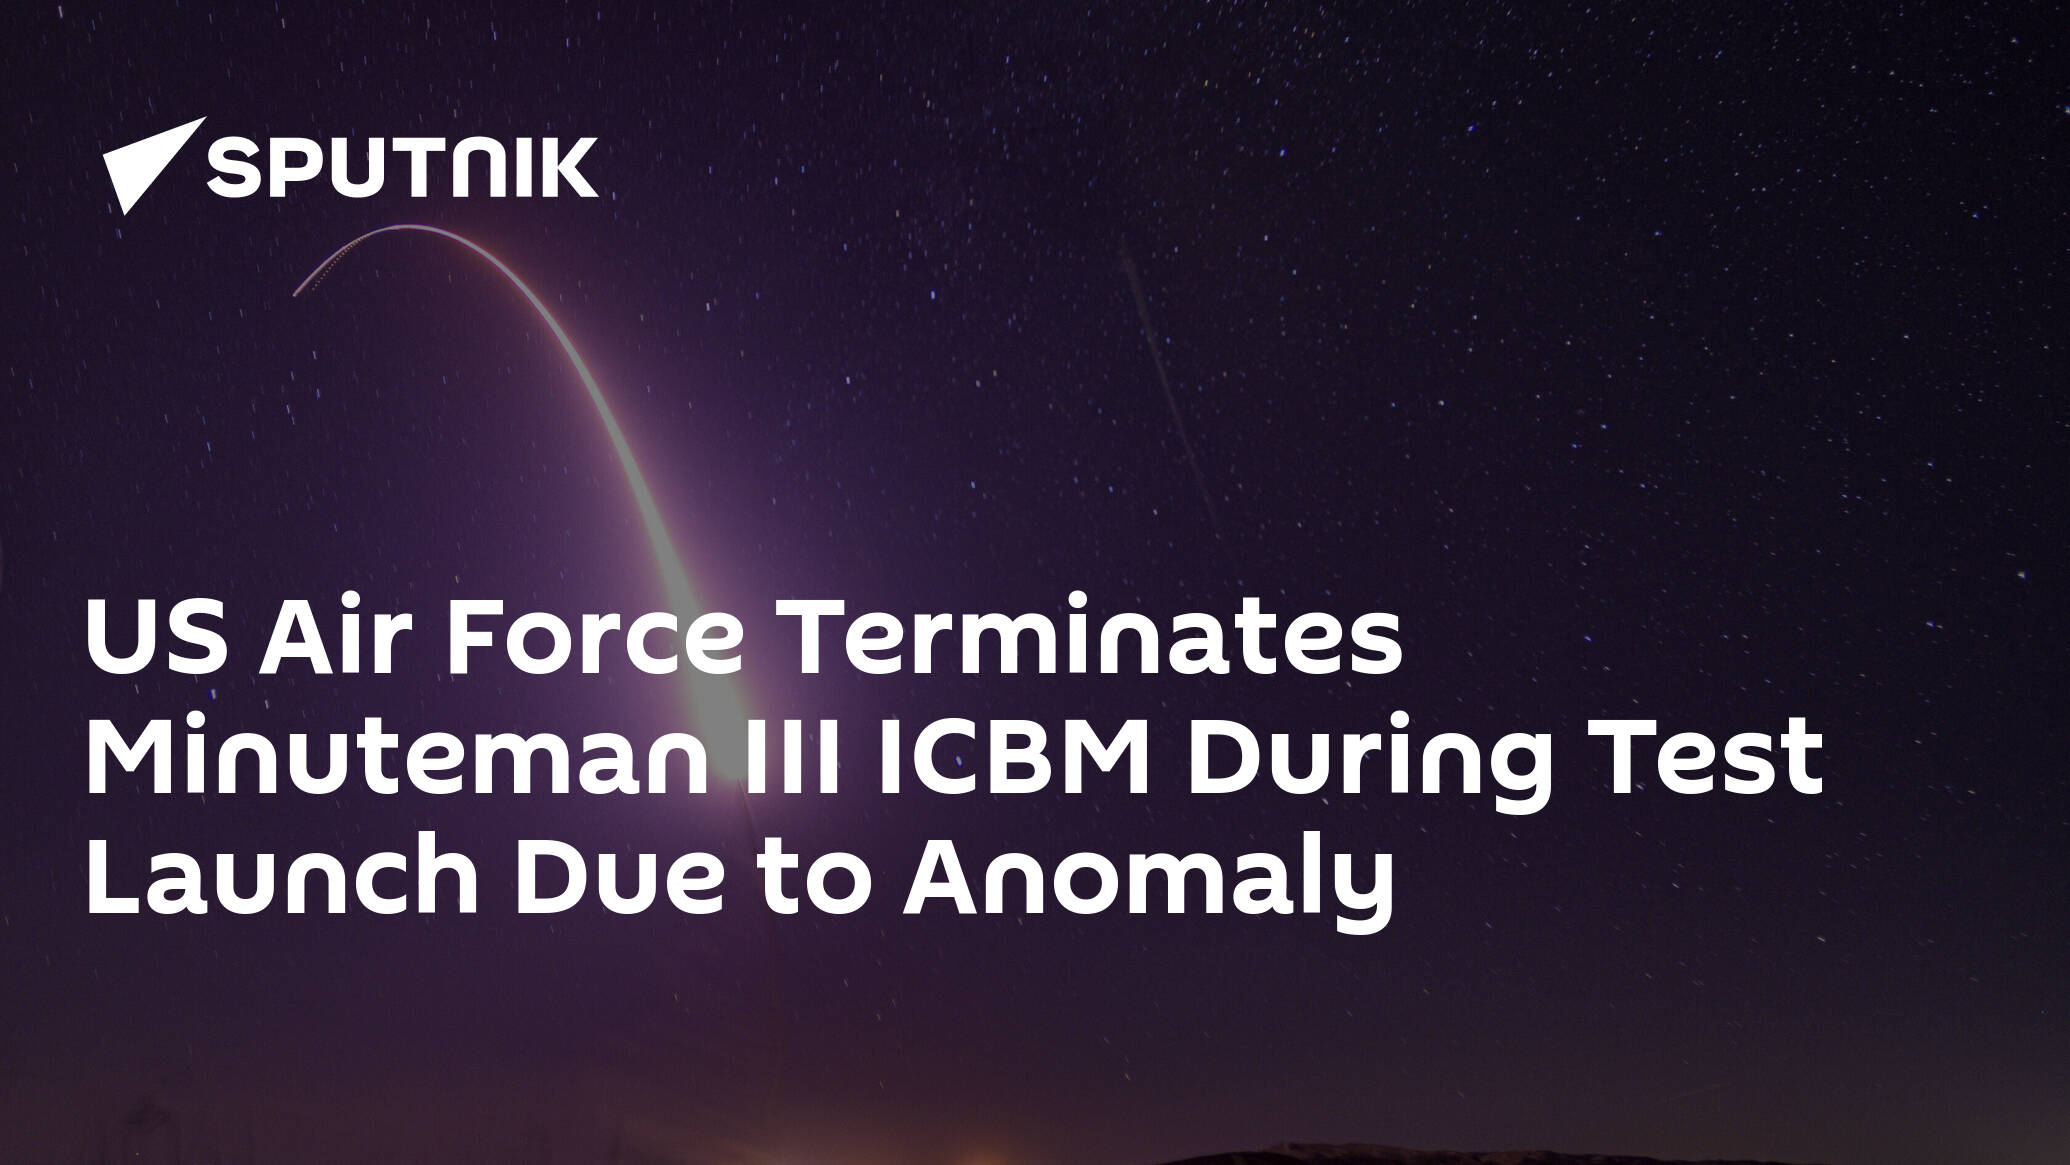 US Air Force Terminates Minuteman III ICBM During Test Launch Due to Anomaly